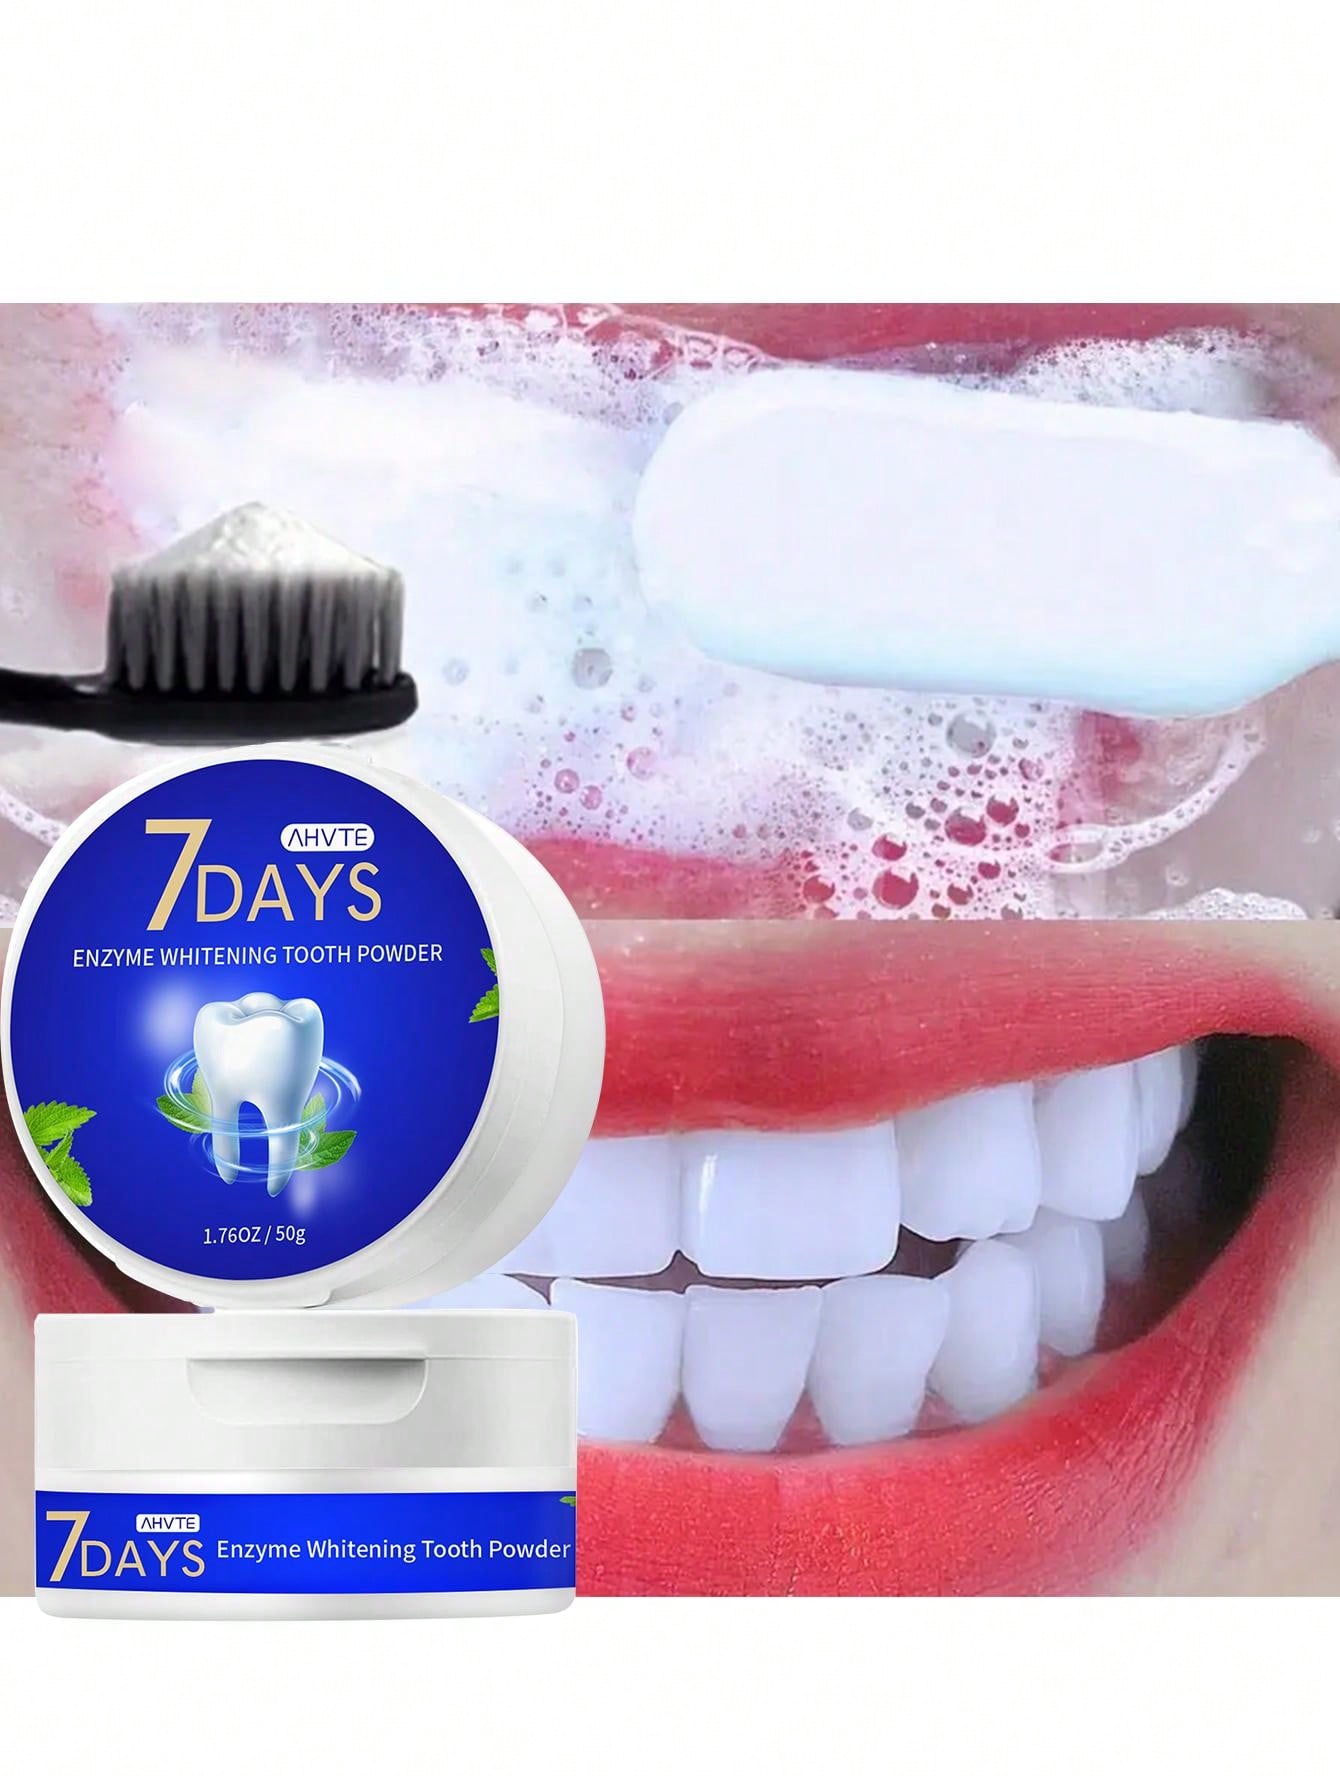 80g Whitening Teeth Powder, 1 Bottle Tooth Powder Remover Stains from Coffee and Smoking